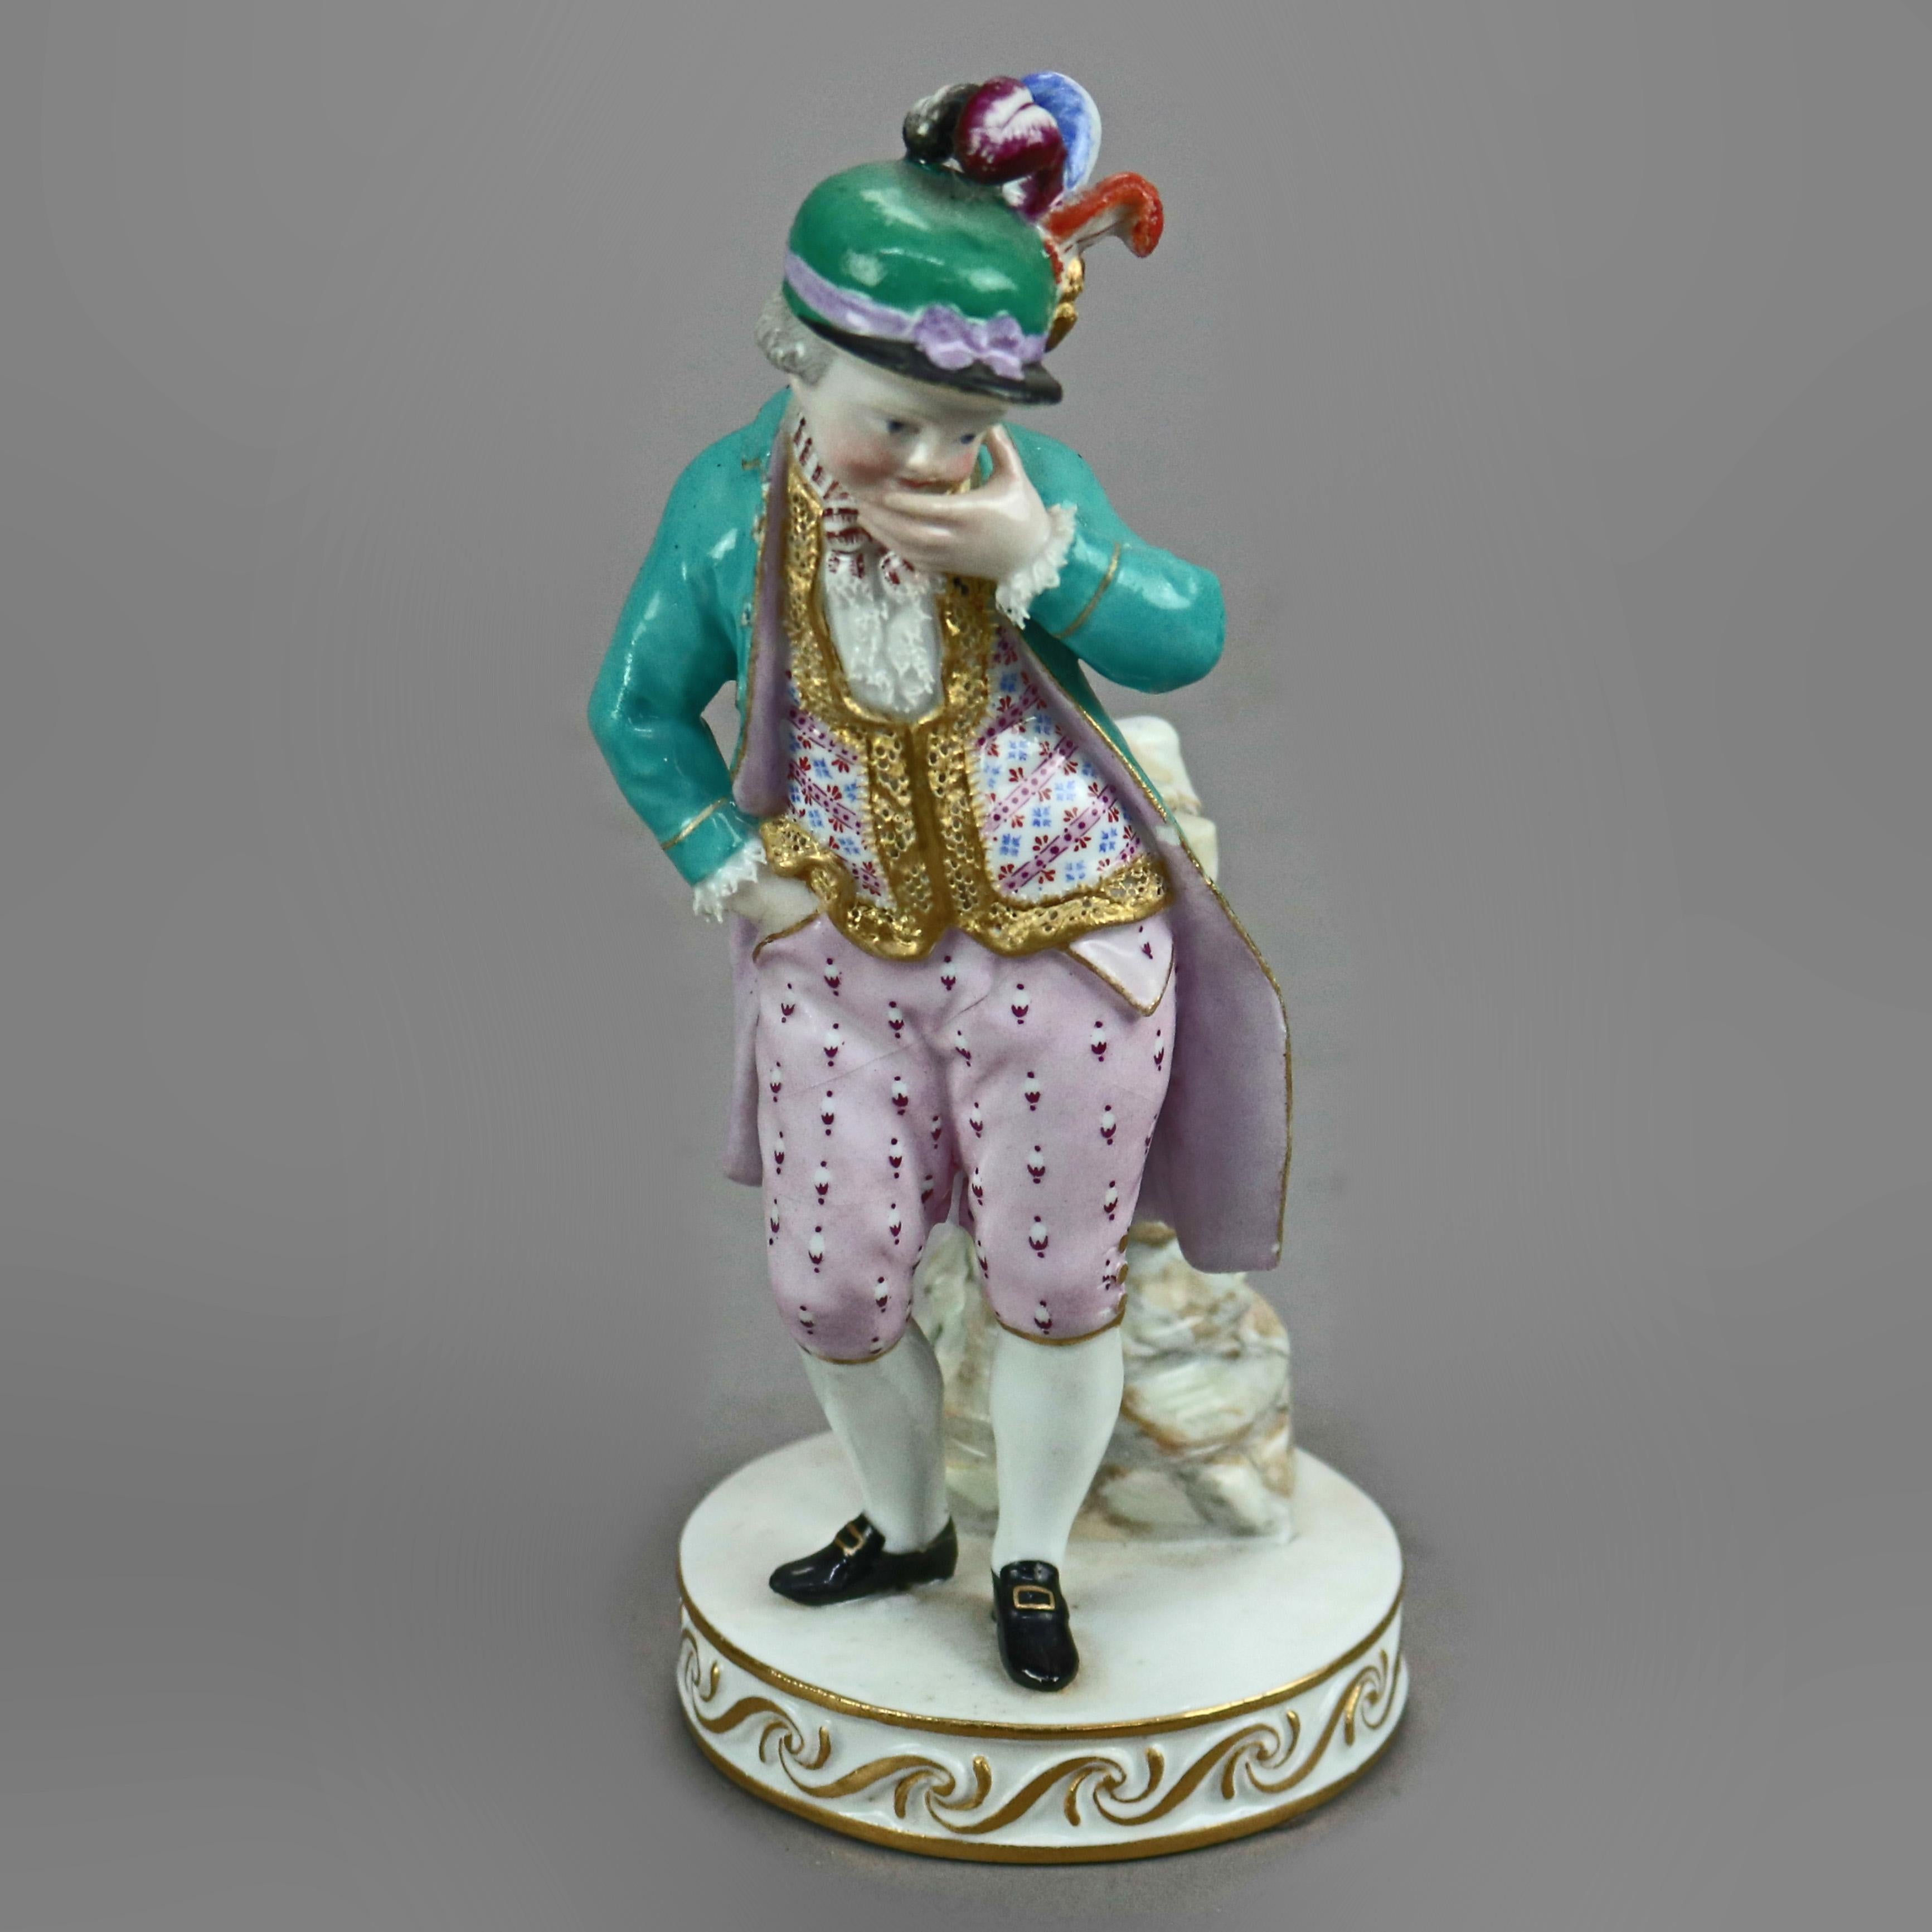 An antique German Meissen figure offers porcelain construction of a boy standing in countryside setting, hand painted with gilt highlights throughout, maker mark on base as photographed, c1890

Measures - 6.25'' H x 2.75'' W x 2.75'' D.